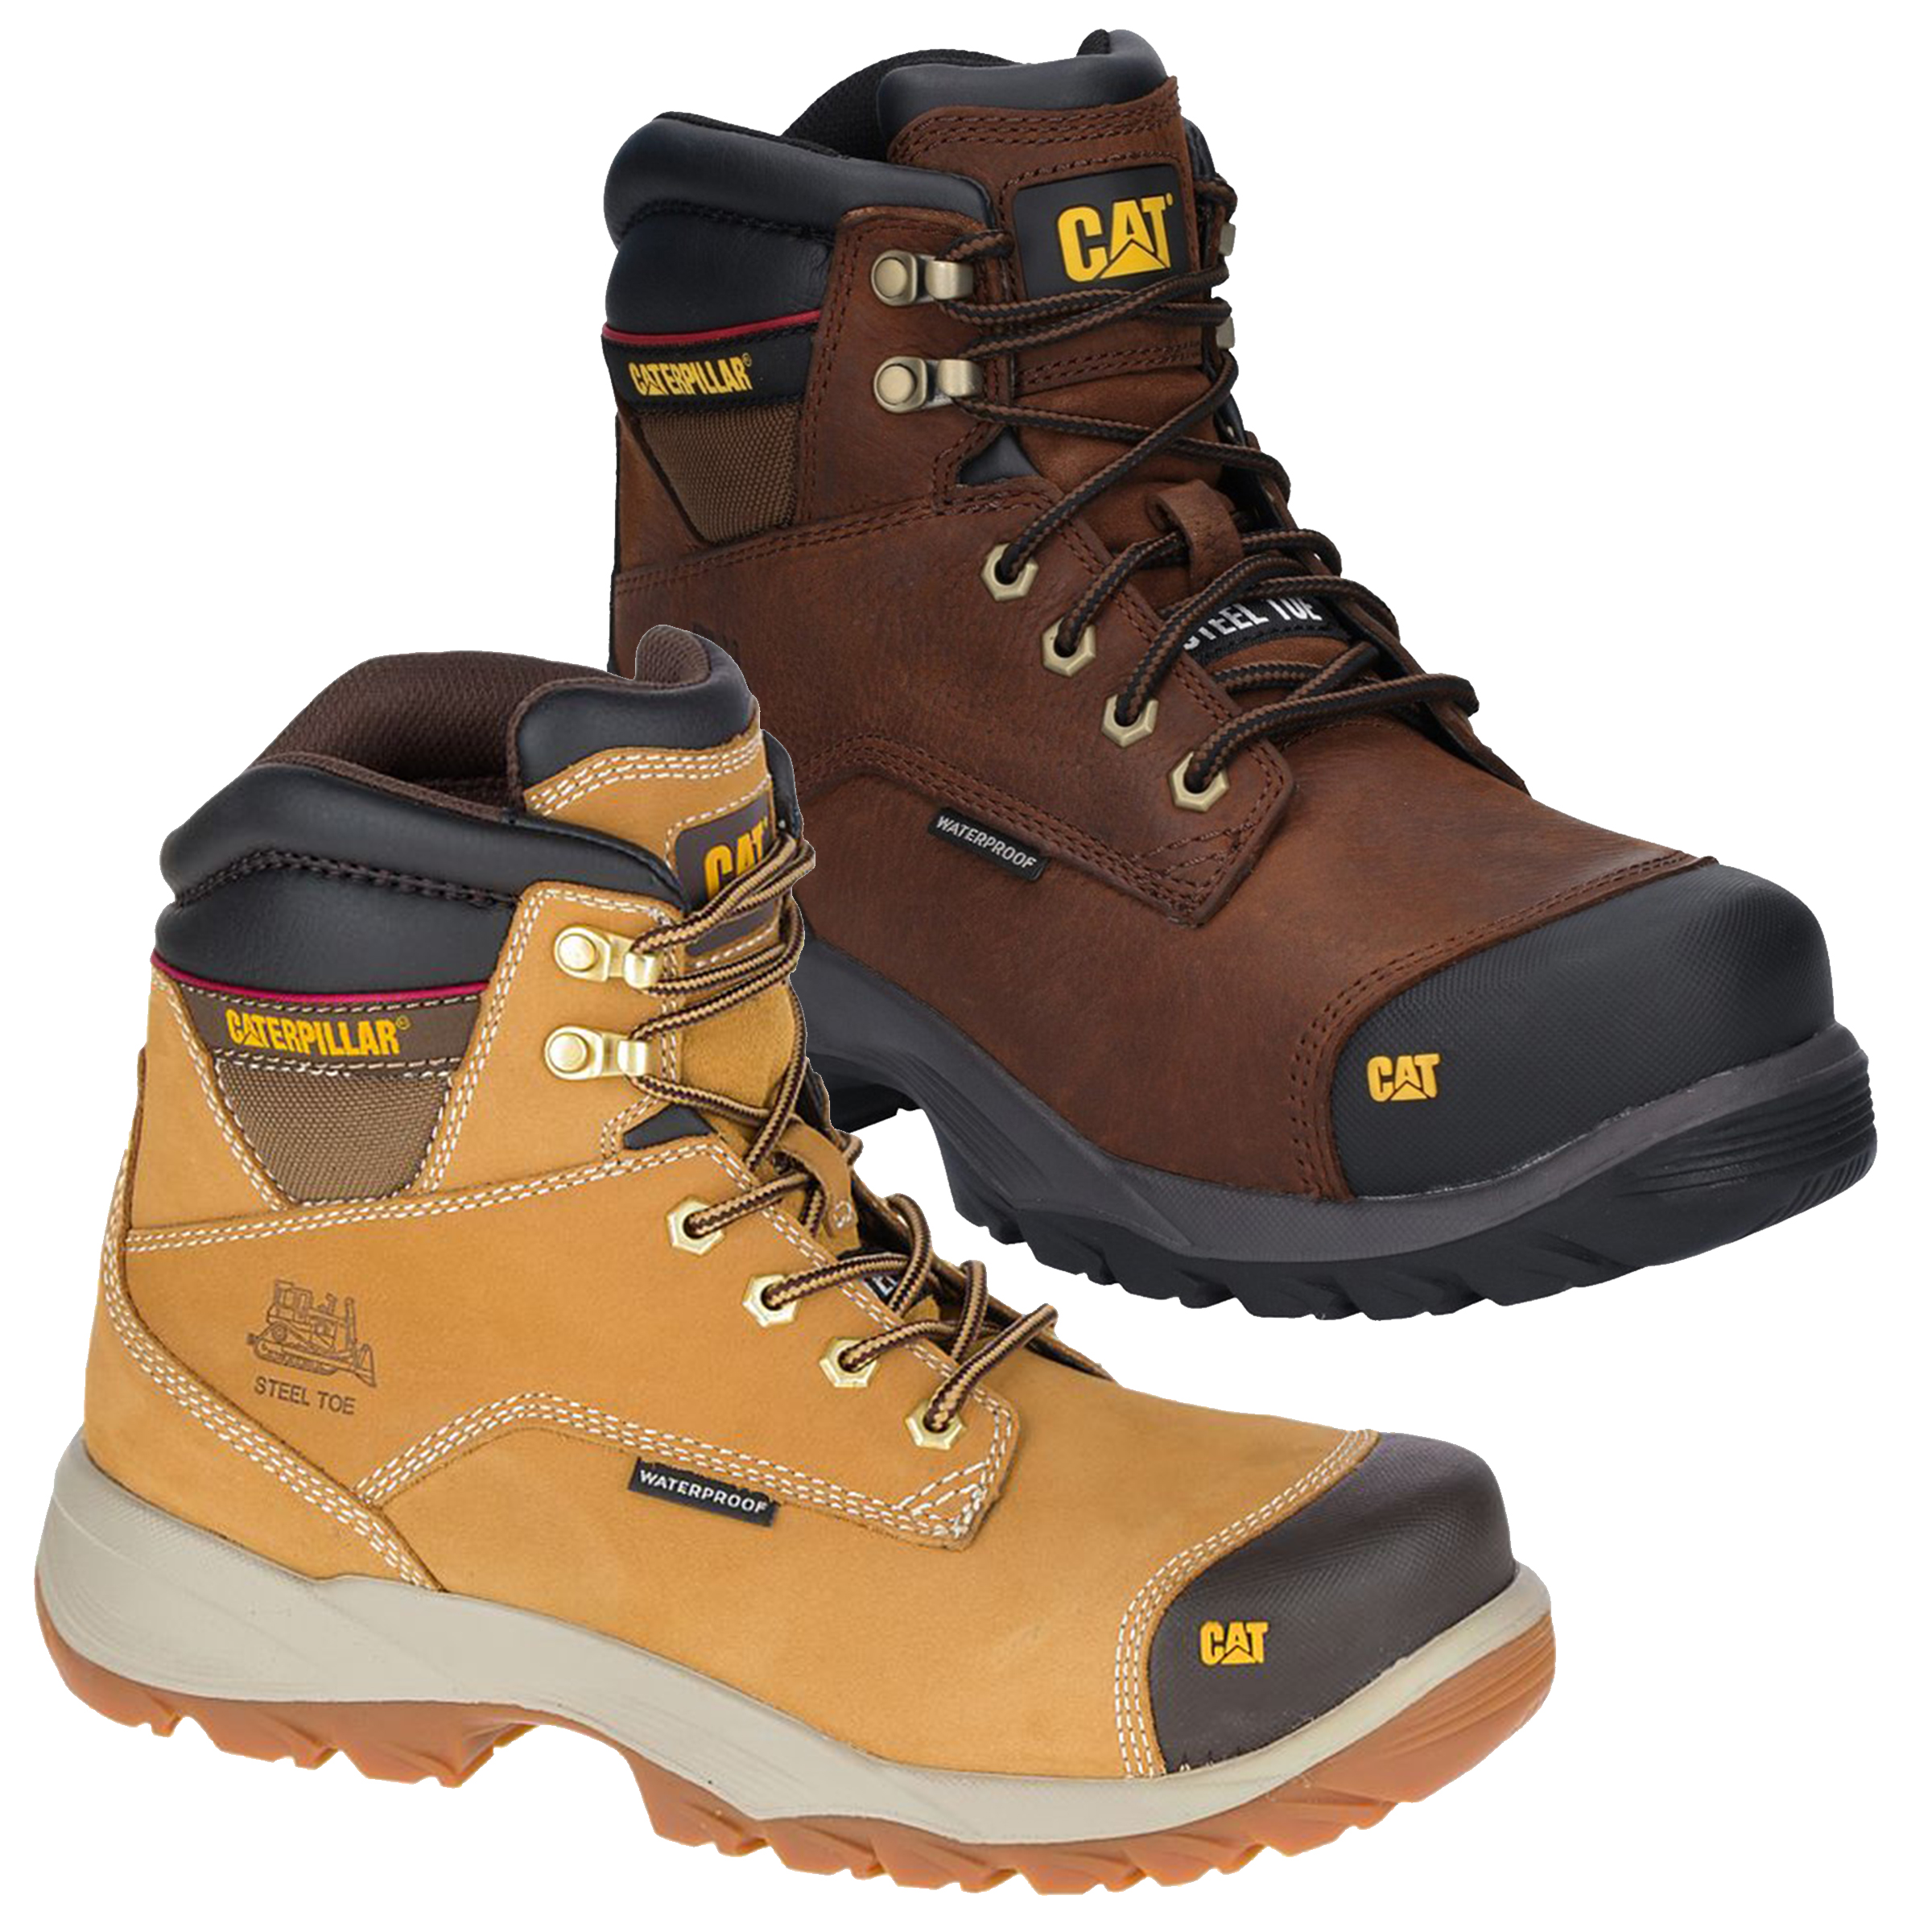 Mens Caterpillar Spiro Steel Toe Midsole S3 Safety Boots Sizes 7 to 12 ...